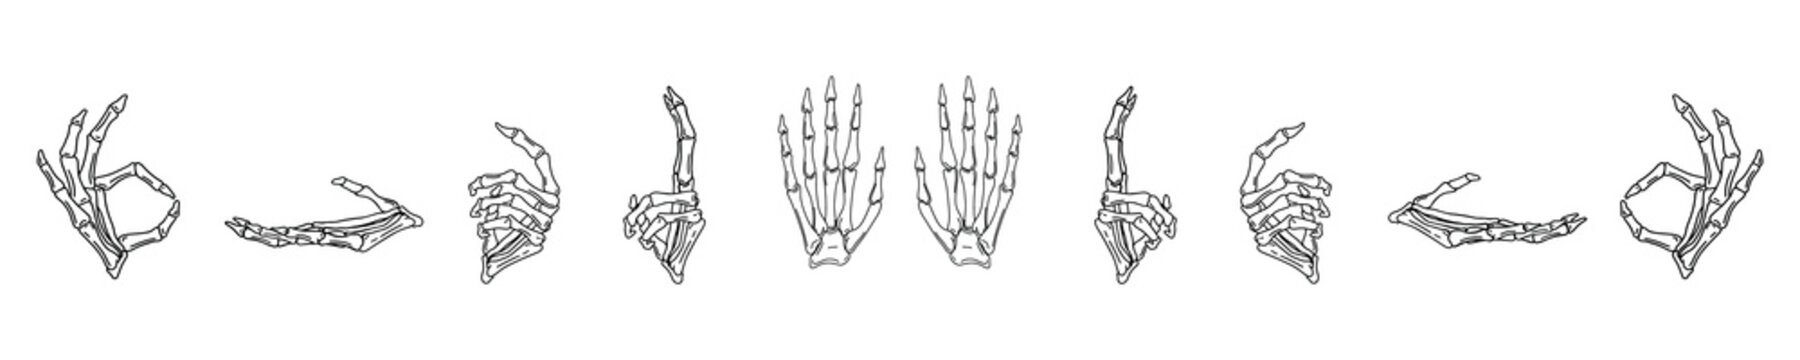 Set of hand drawn skeleton hands in different positions. Vector phalanx bone hands isolated on white background. Tattoo. Occultism, esoteric, spiritual design elements. Death. Mexico. Halloween.